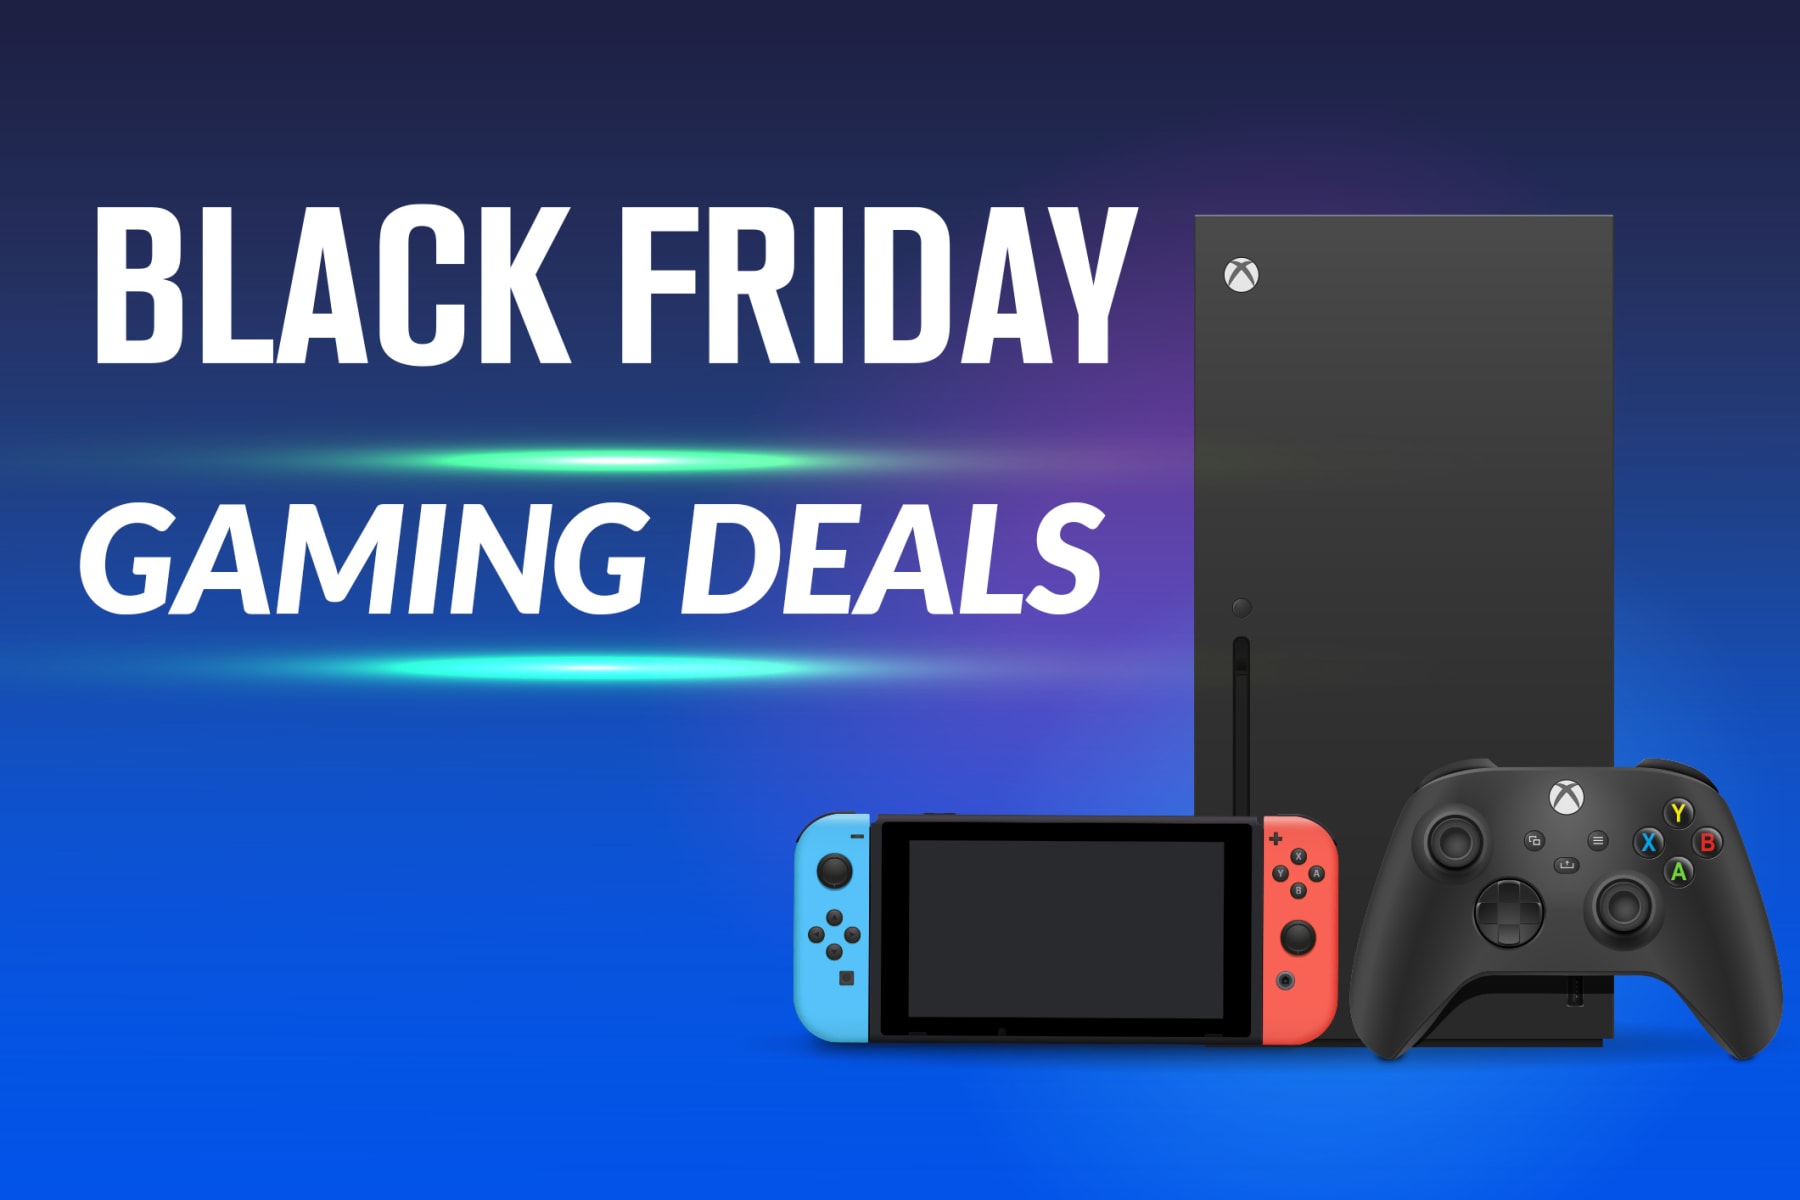 consoles next to Black Friday gaming deals text